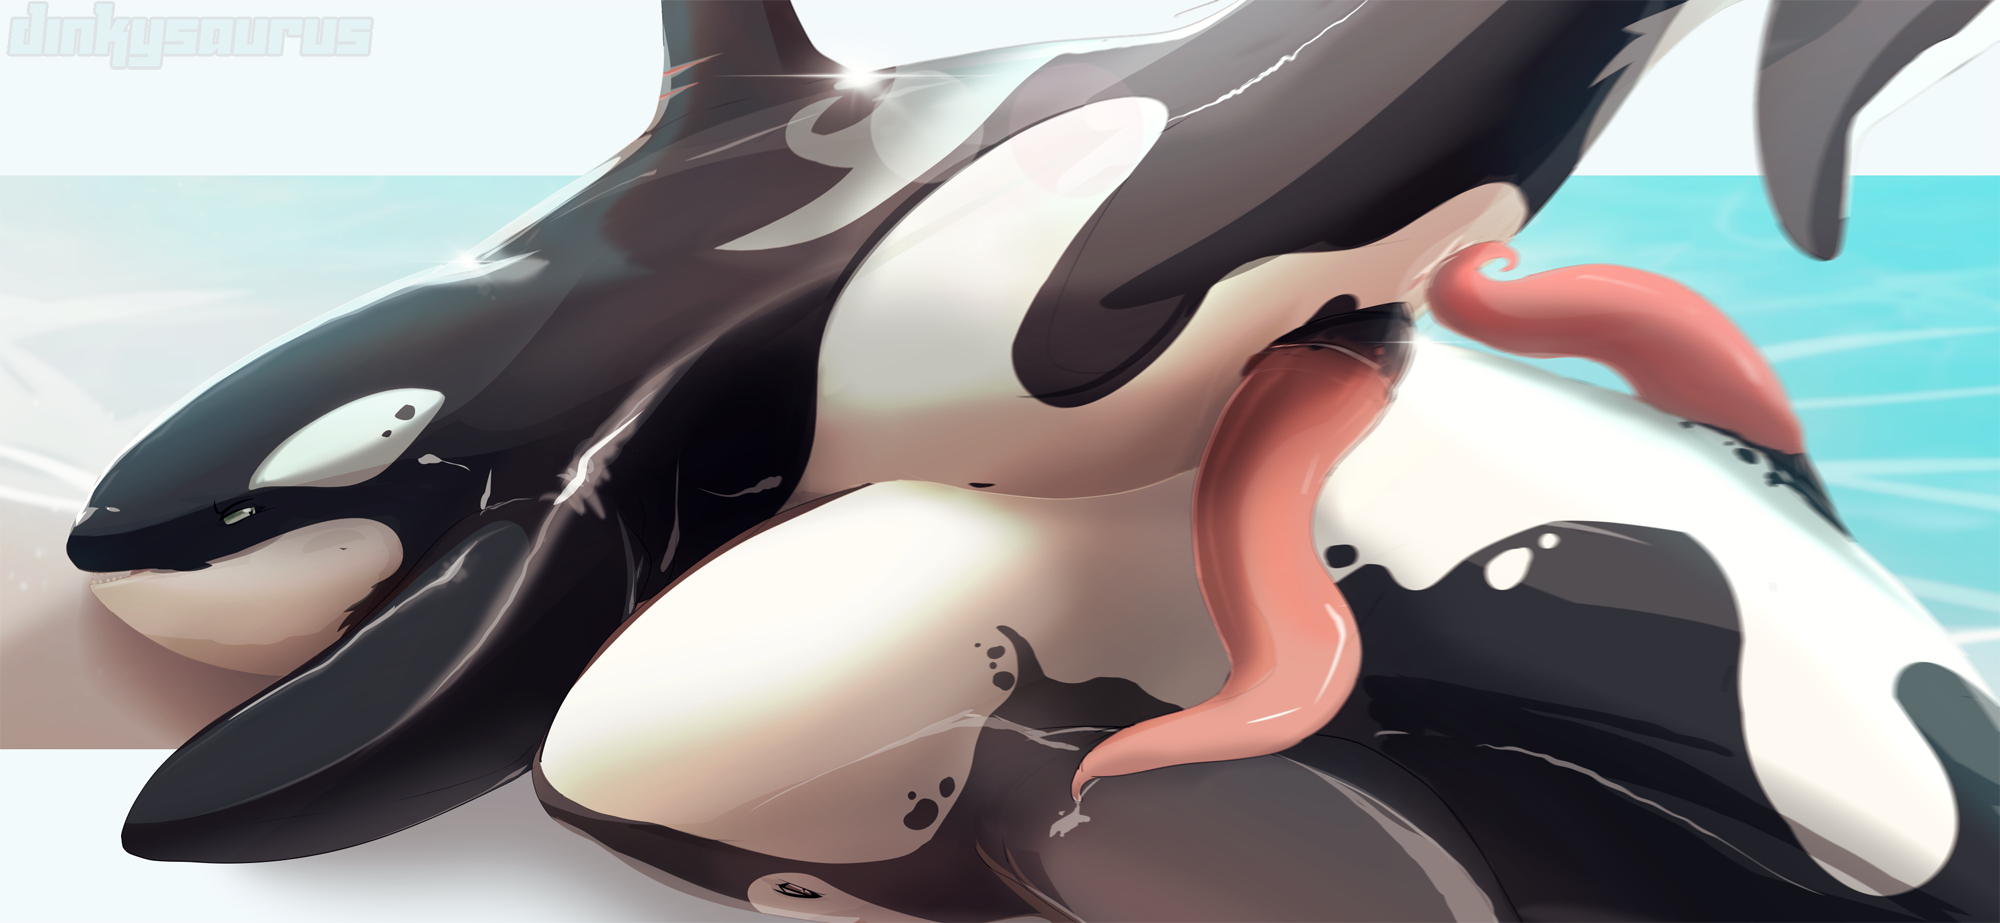 Orca cock - Best adult videos and photos.